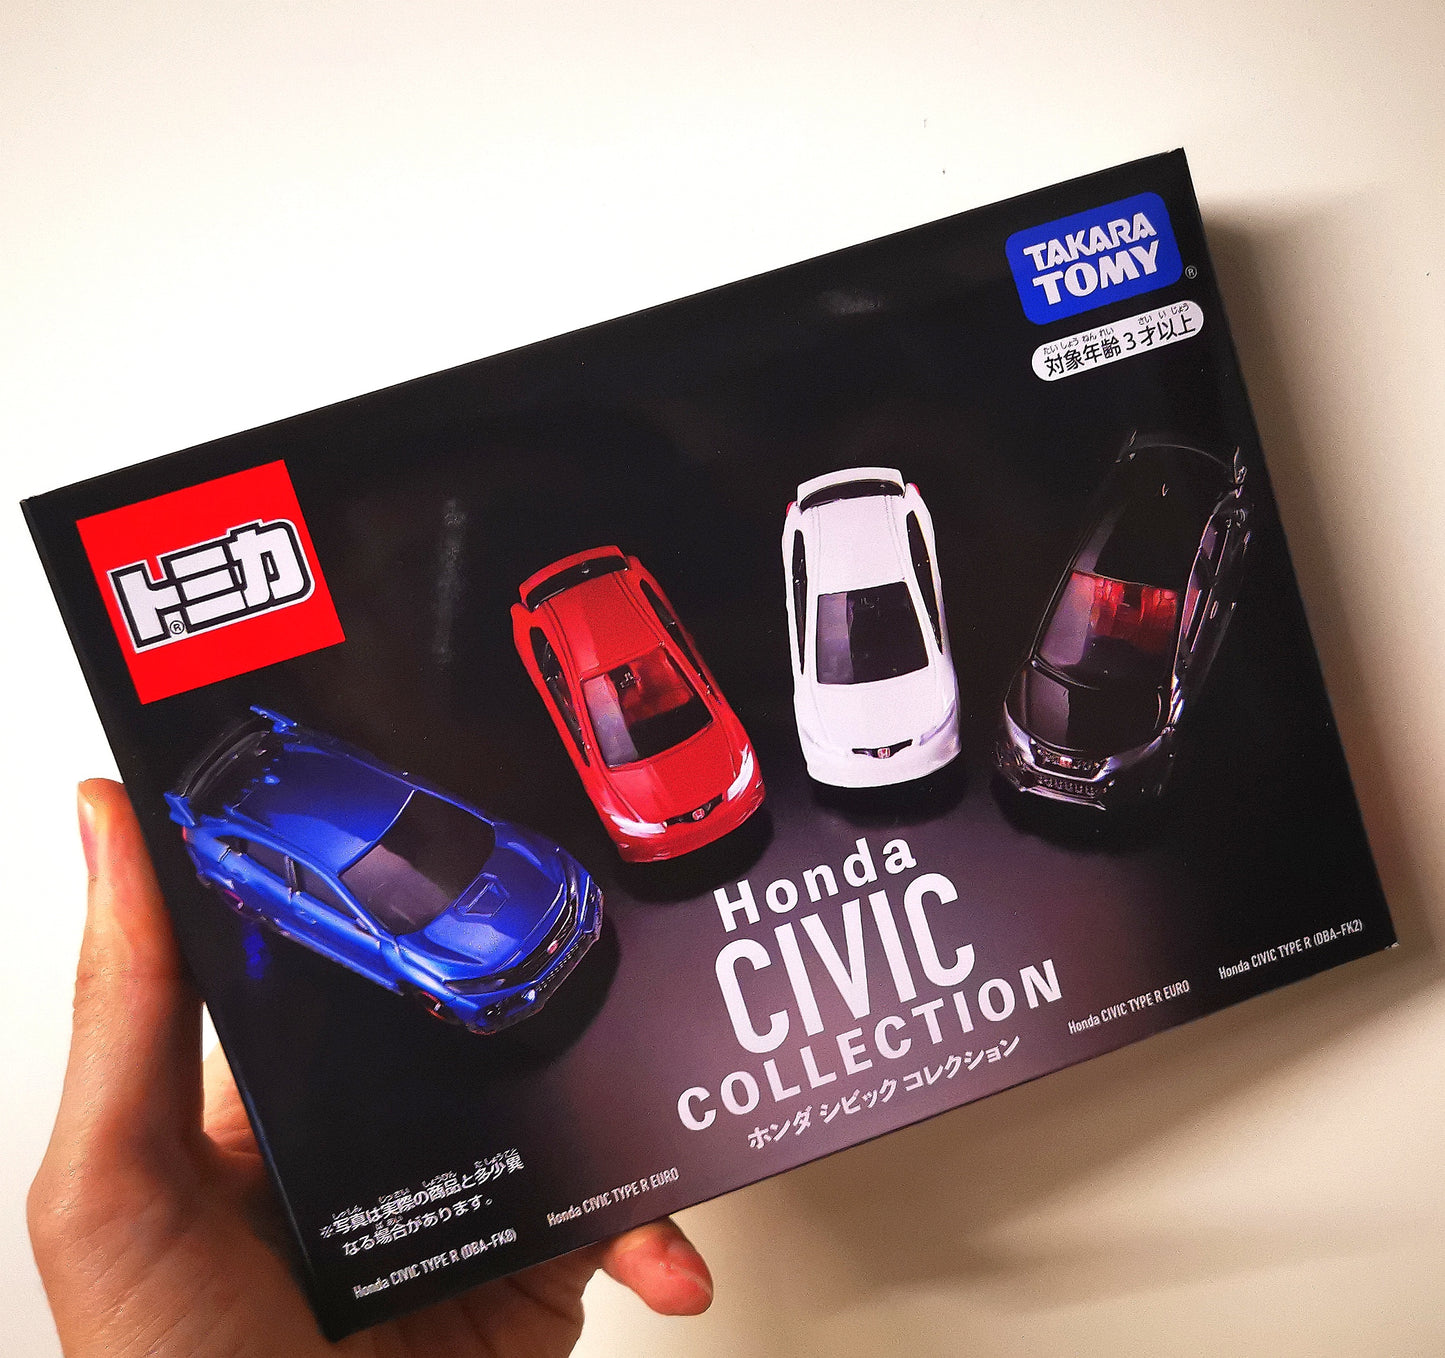 Tomica Gift Set Series Honda Civic Collection set of four